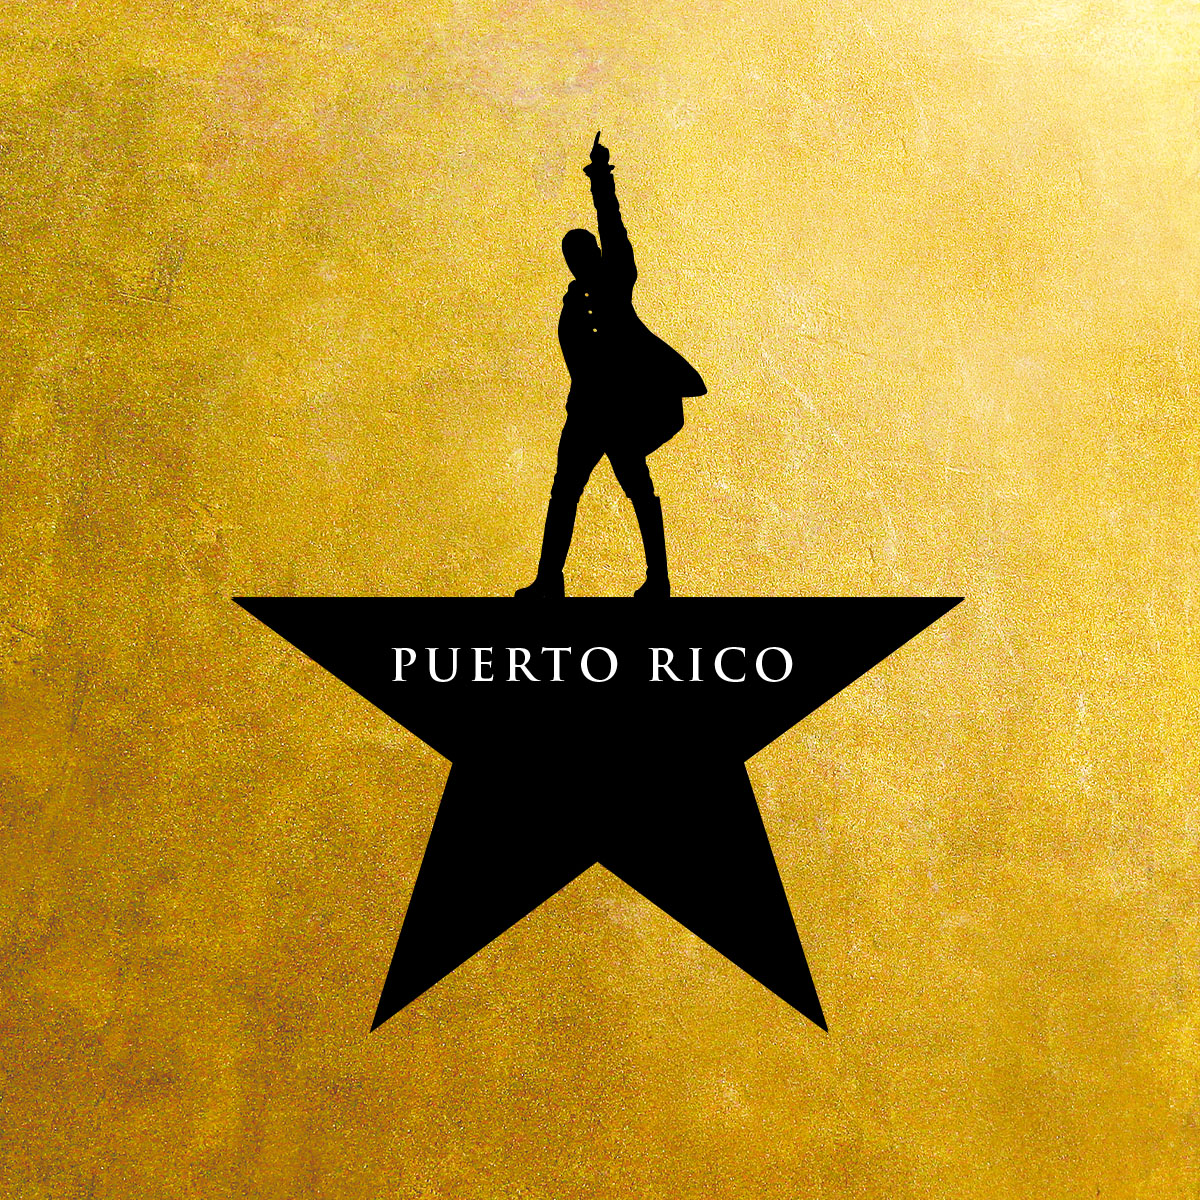 For 2 weeks in June @HamiltonMusical returns to #PuertoRico w/ the incredible #Angelica company. @ReneeGoldsberry, @ChrisisSingin & @leslieodomjr will be there w/ me on FRI June 16 2023 raising funds for @FlamboyanFDN & @HispanicFed. Hope you can join us. hamilton.hispanicfederation.org